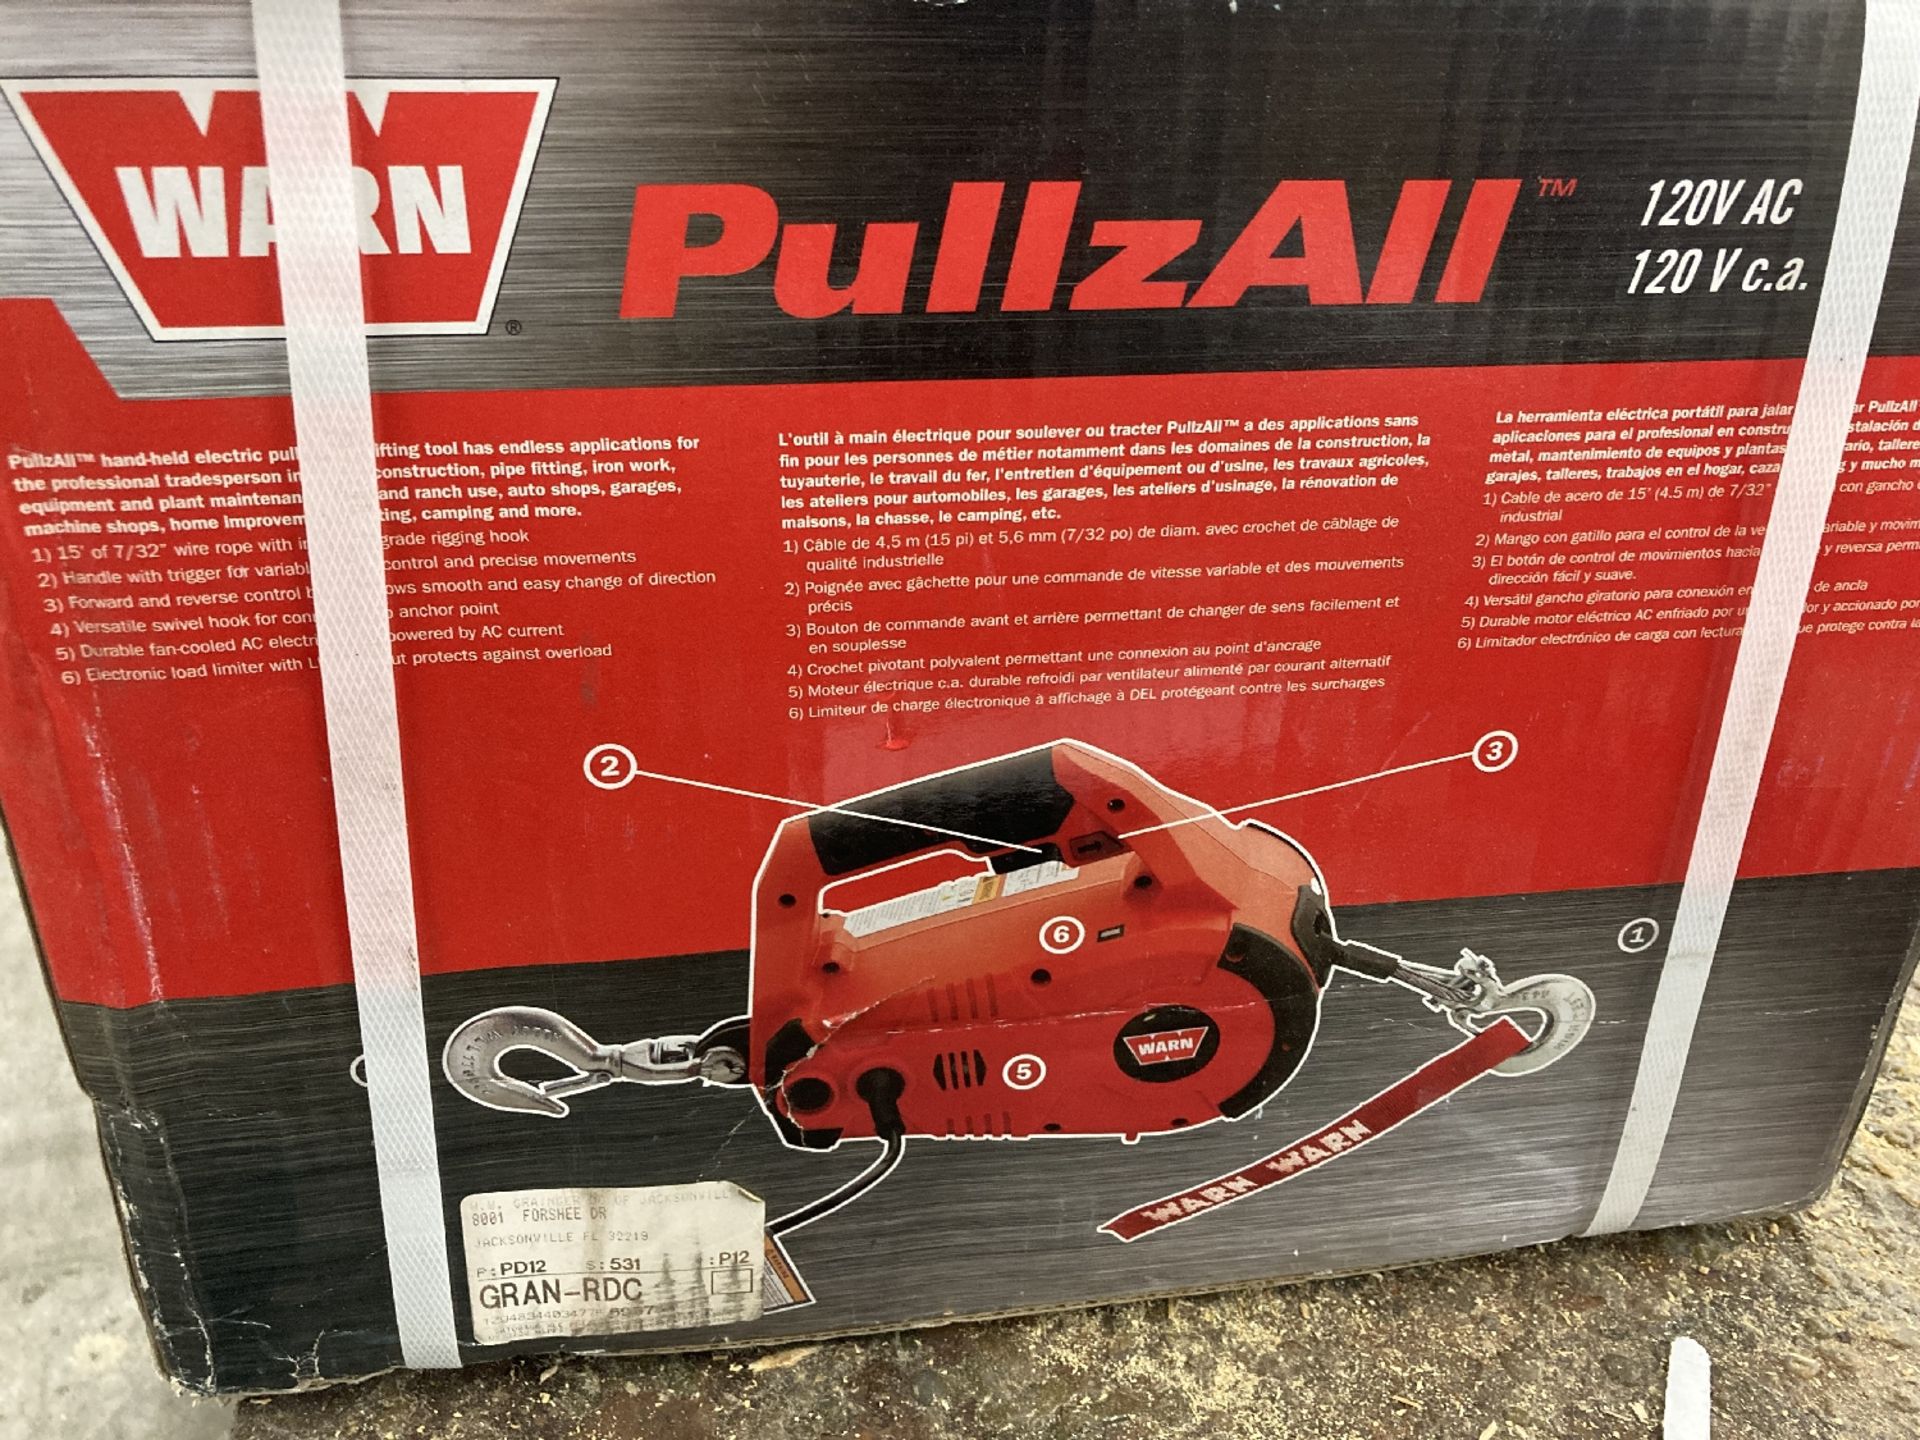 Warn PullzAll 885000 1,000-Lb. Capacity Electric Wench - Image 3 of 3